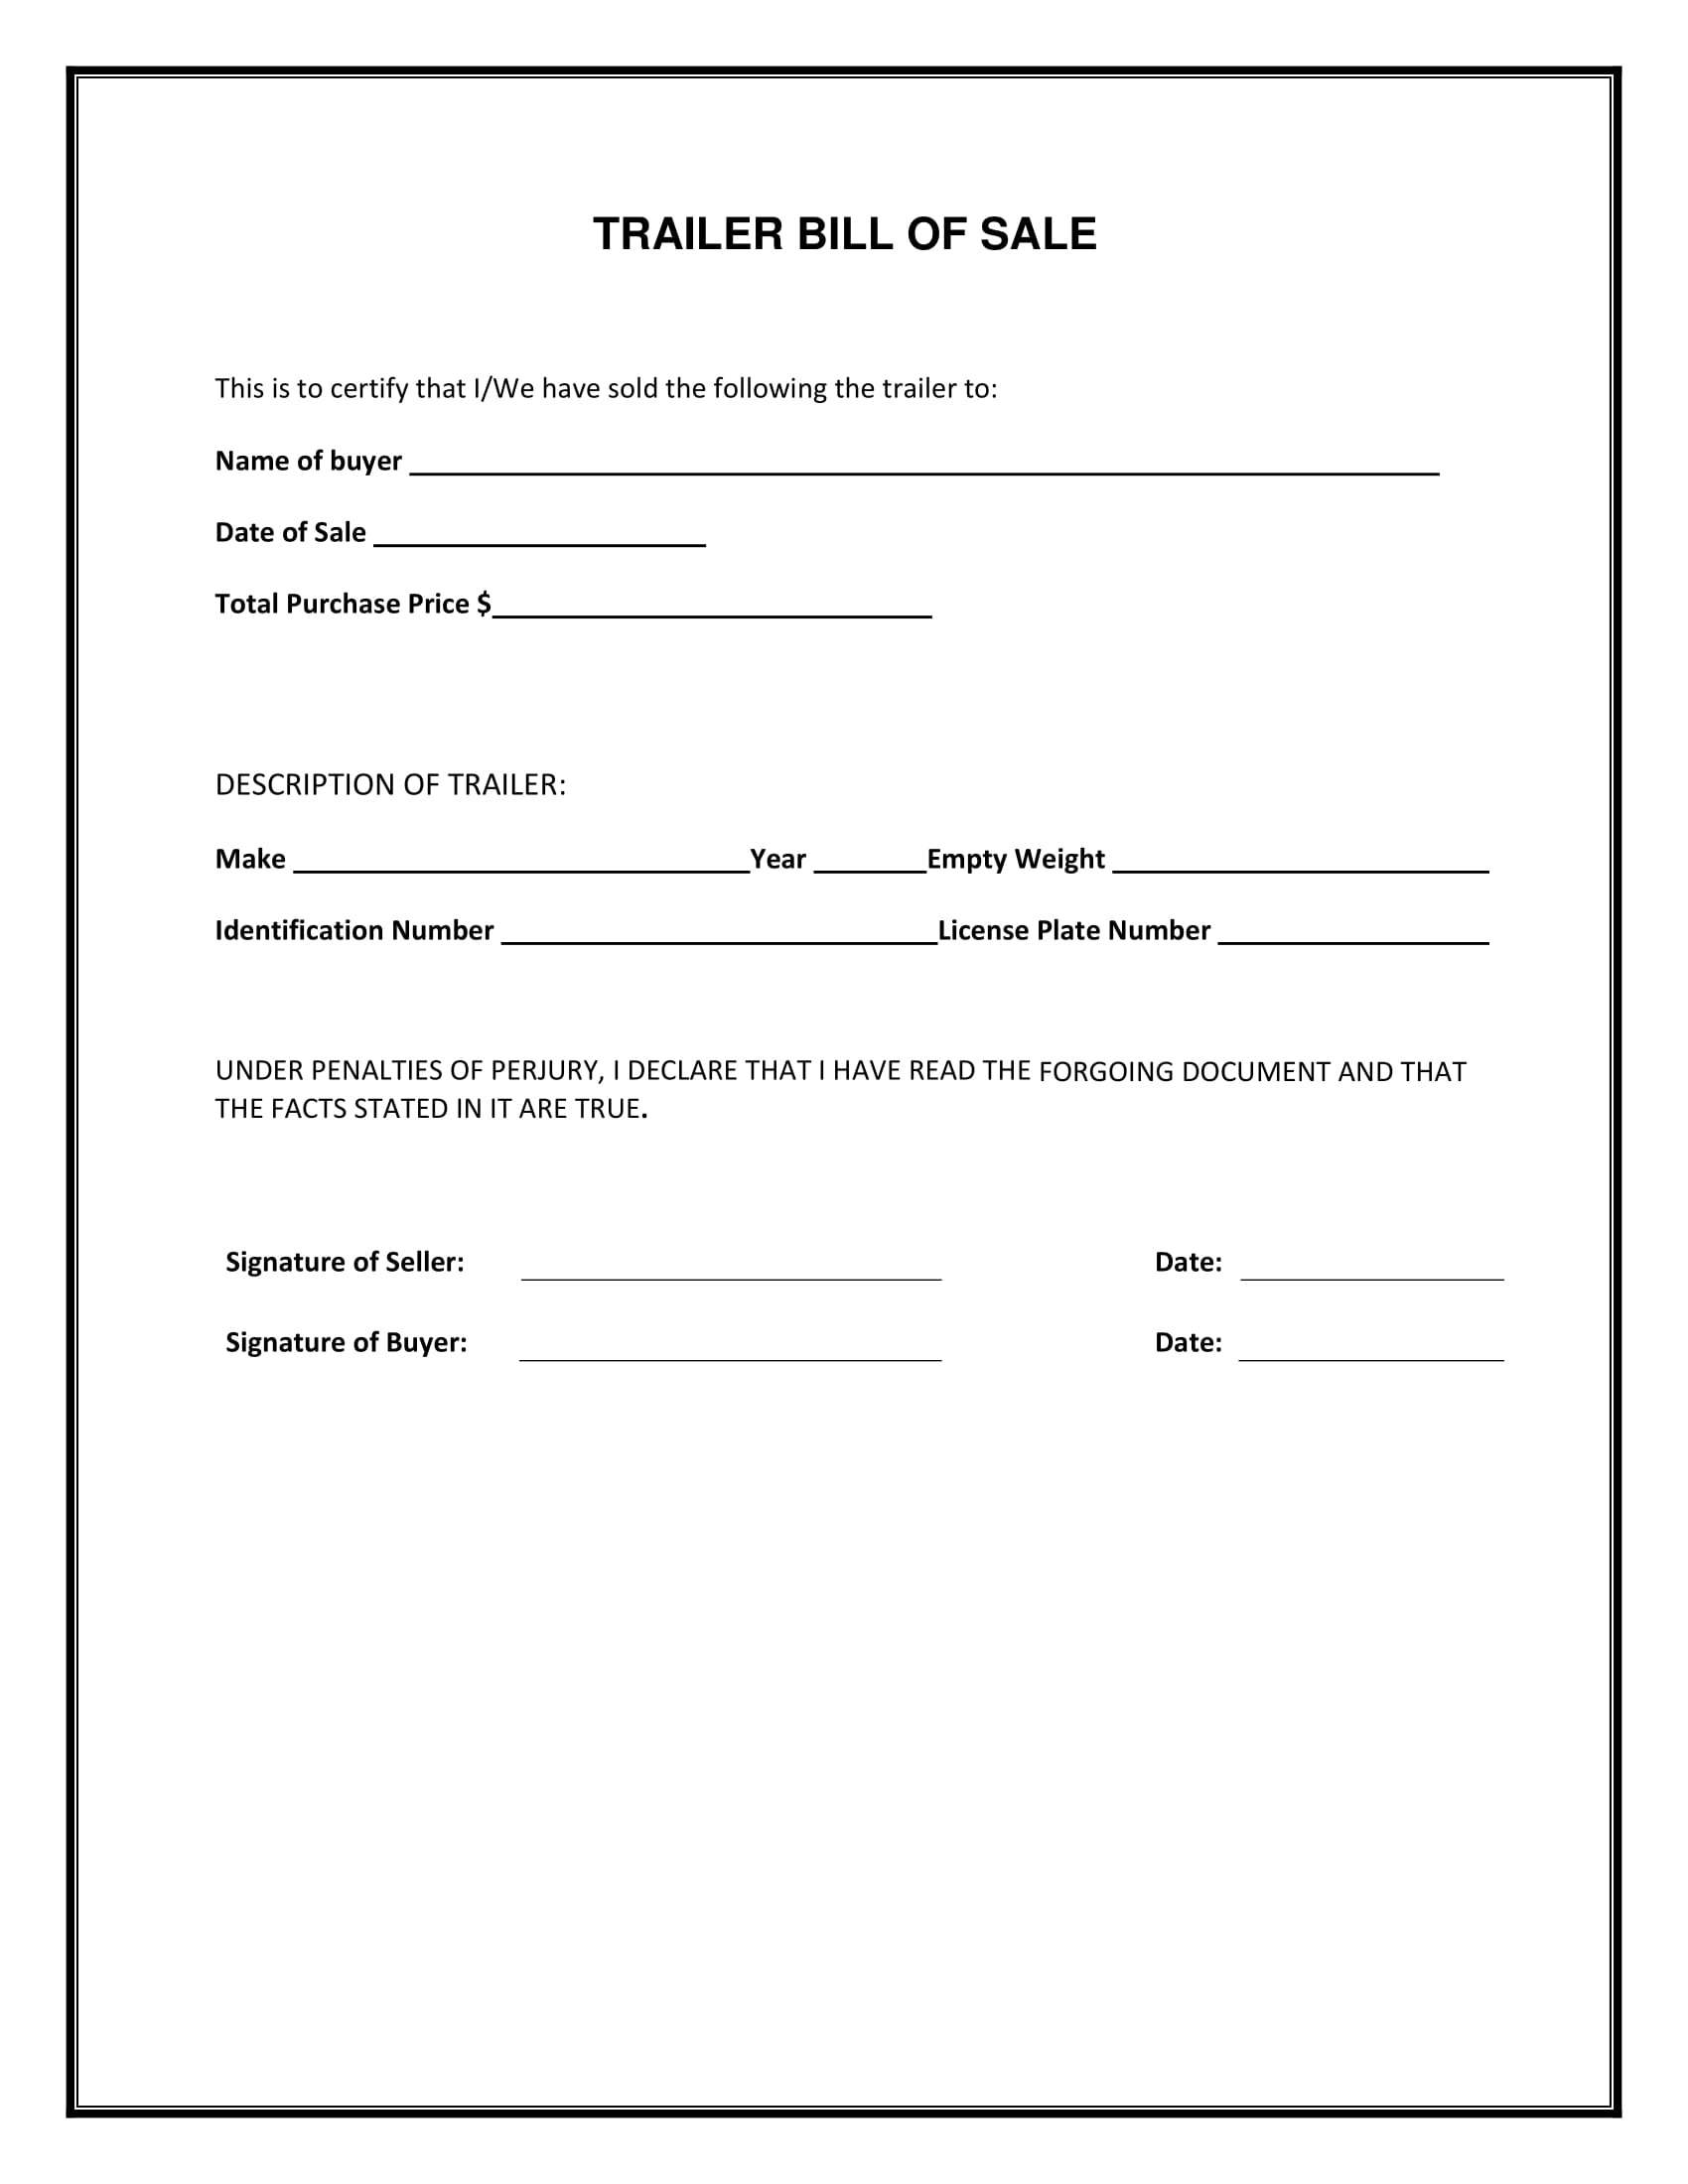 Free Florida Trailer Bill Of Sale Template | Fillable Forms intended for Free Printable Bill Of Sale For Trailer